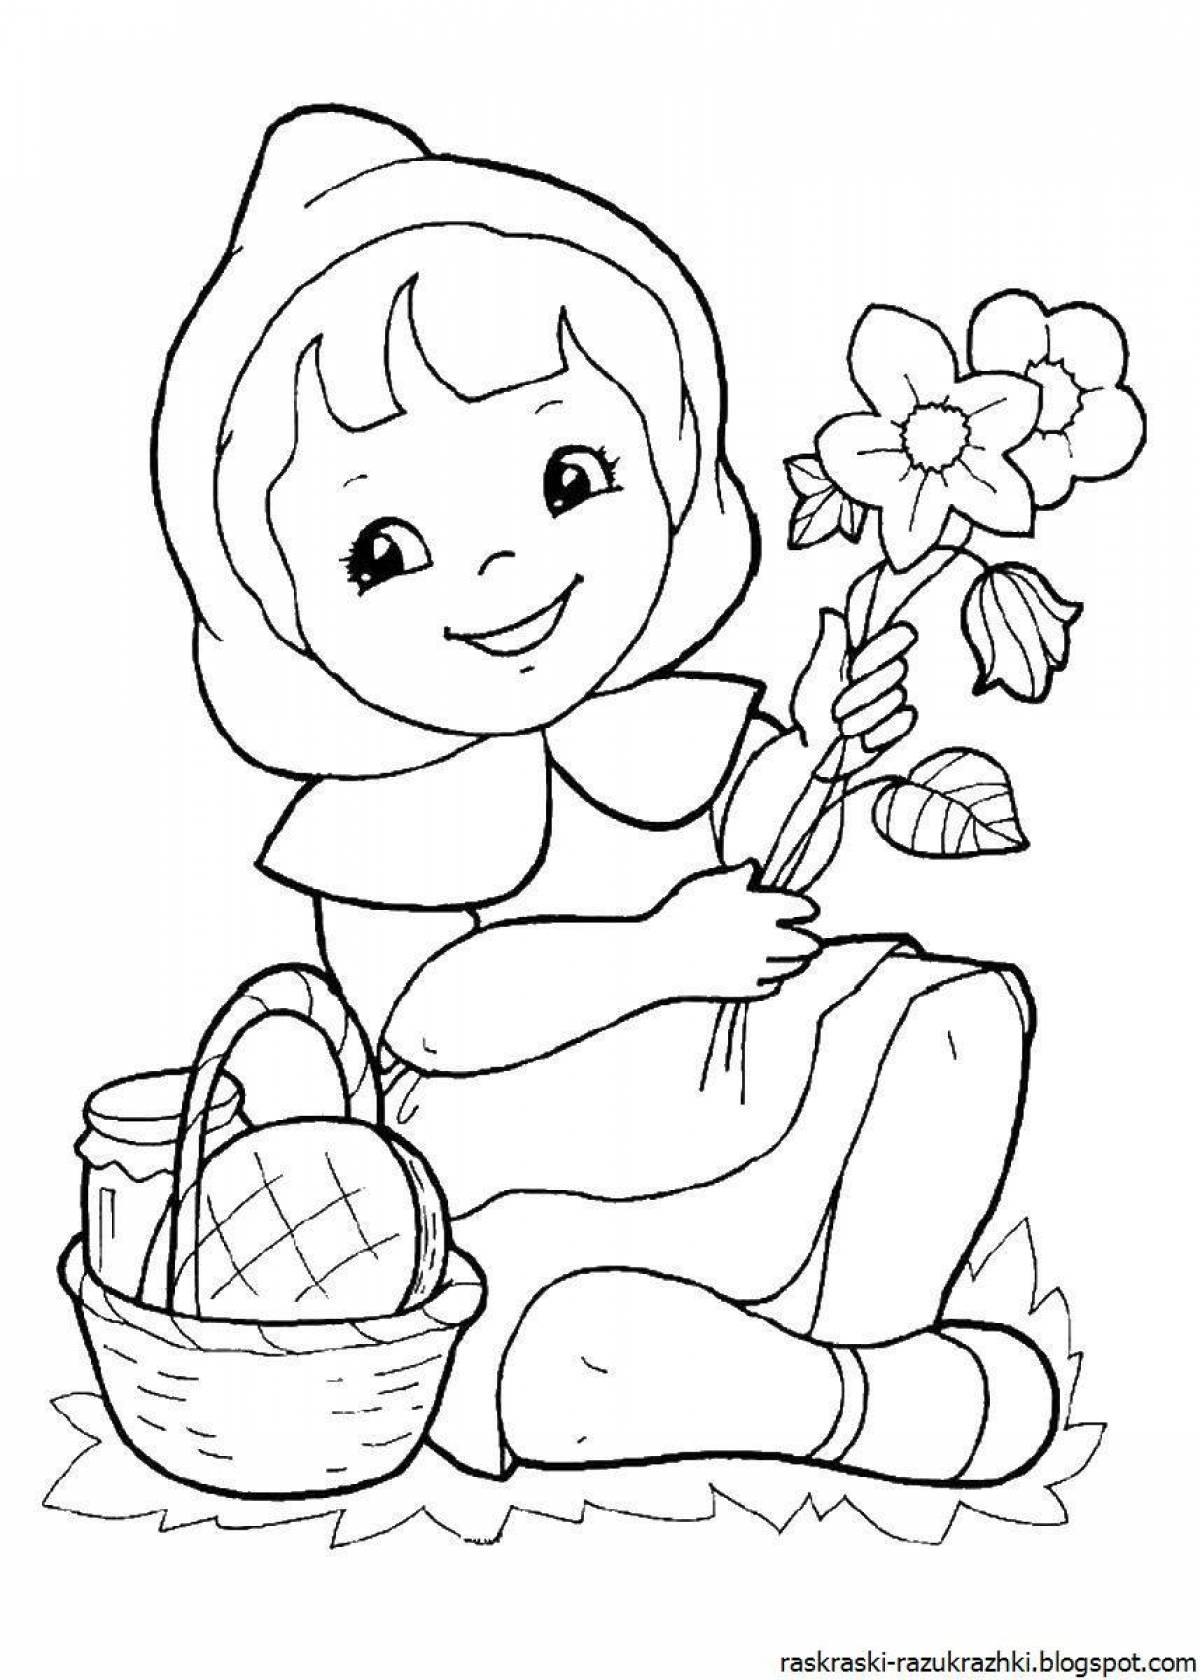 Colorful little red riding hood coloring page